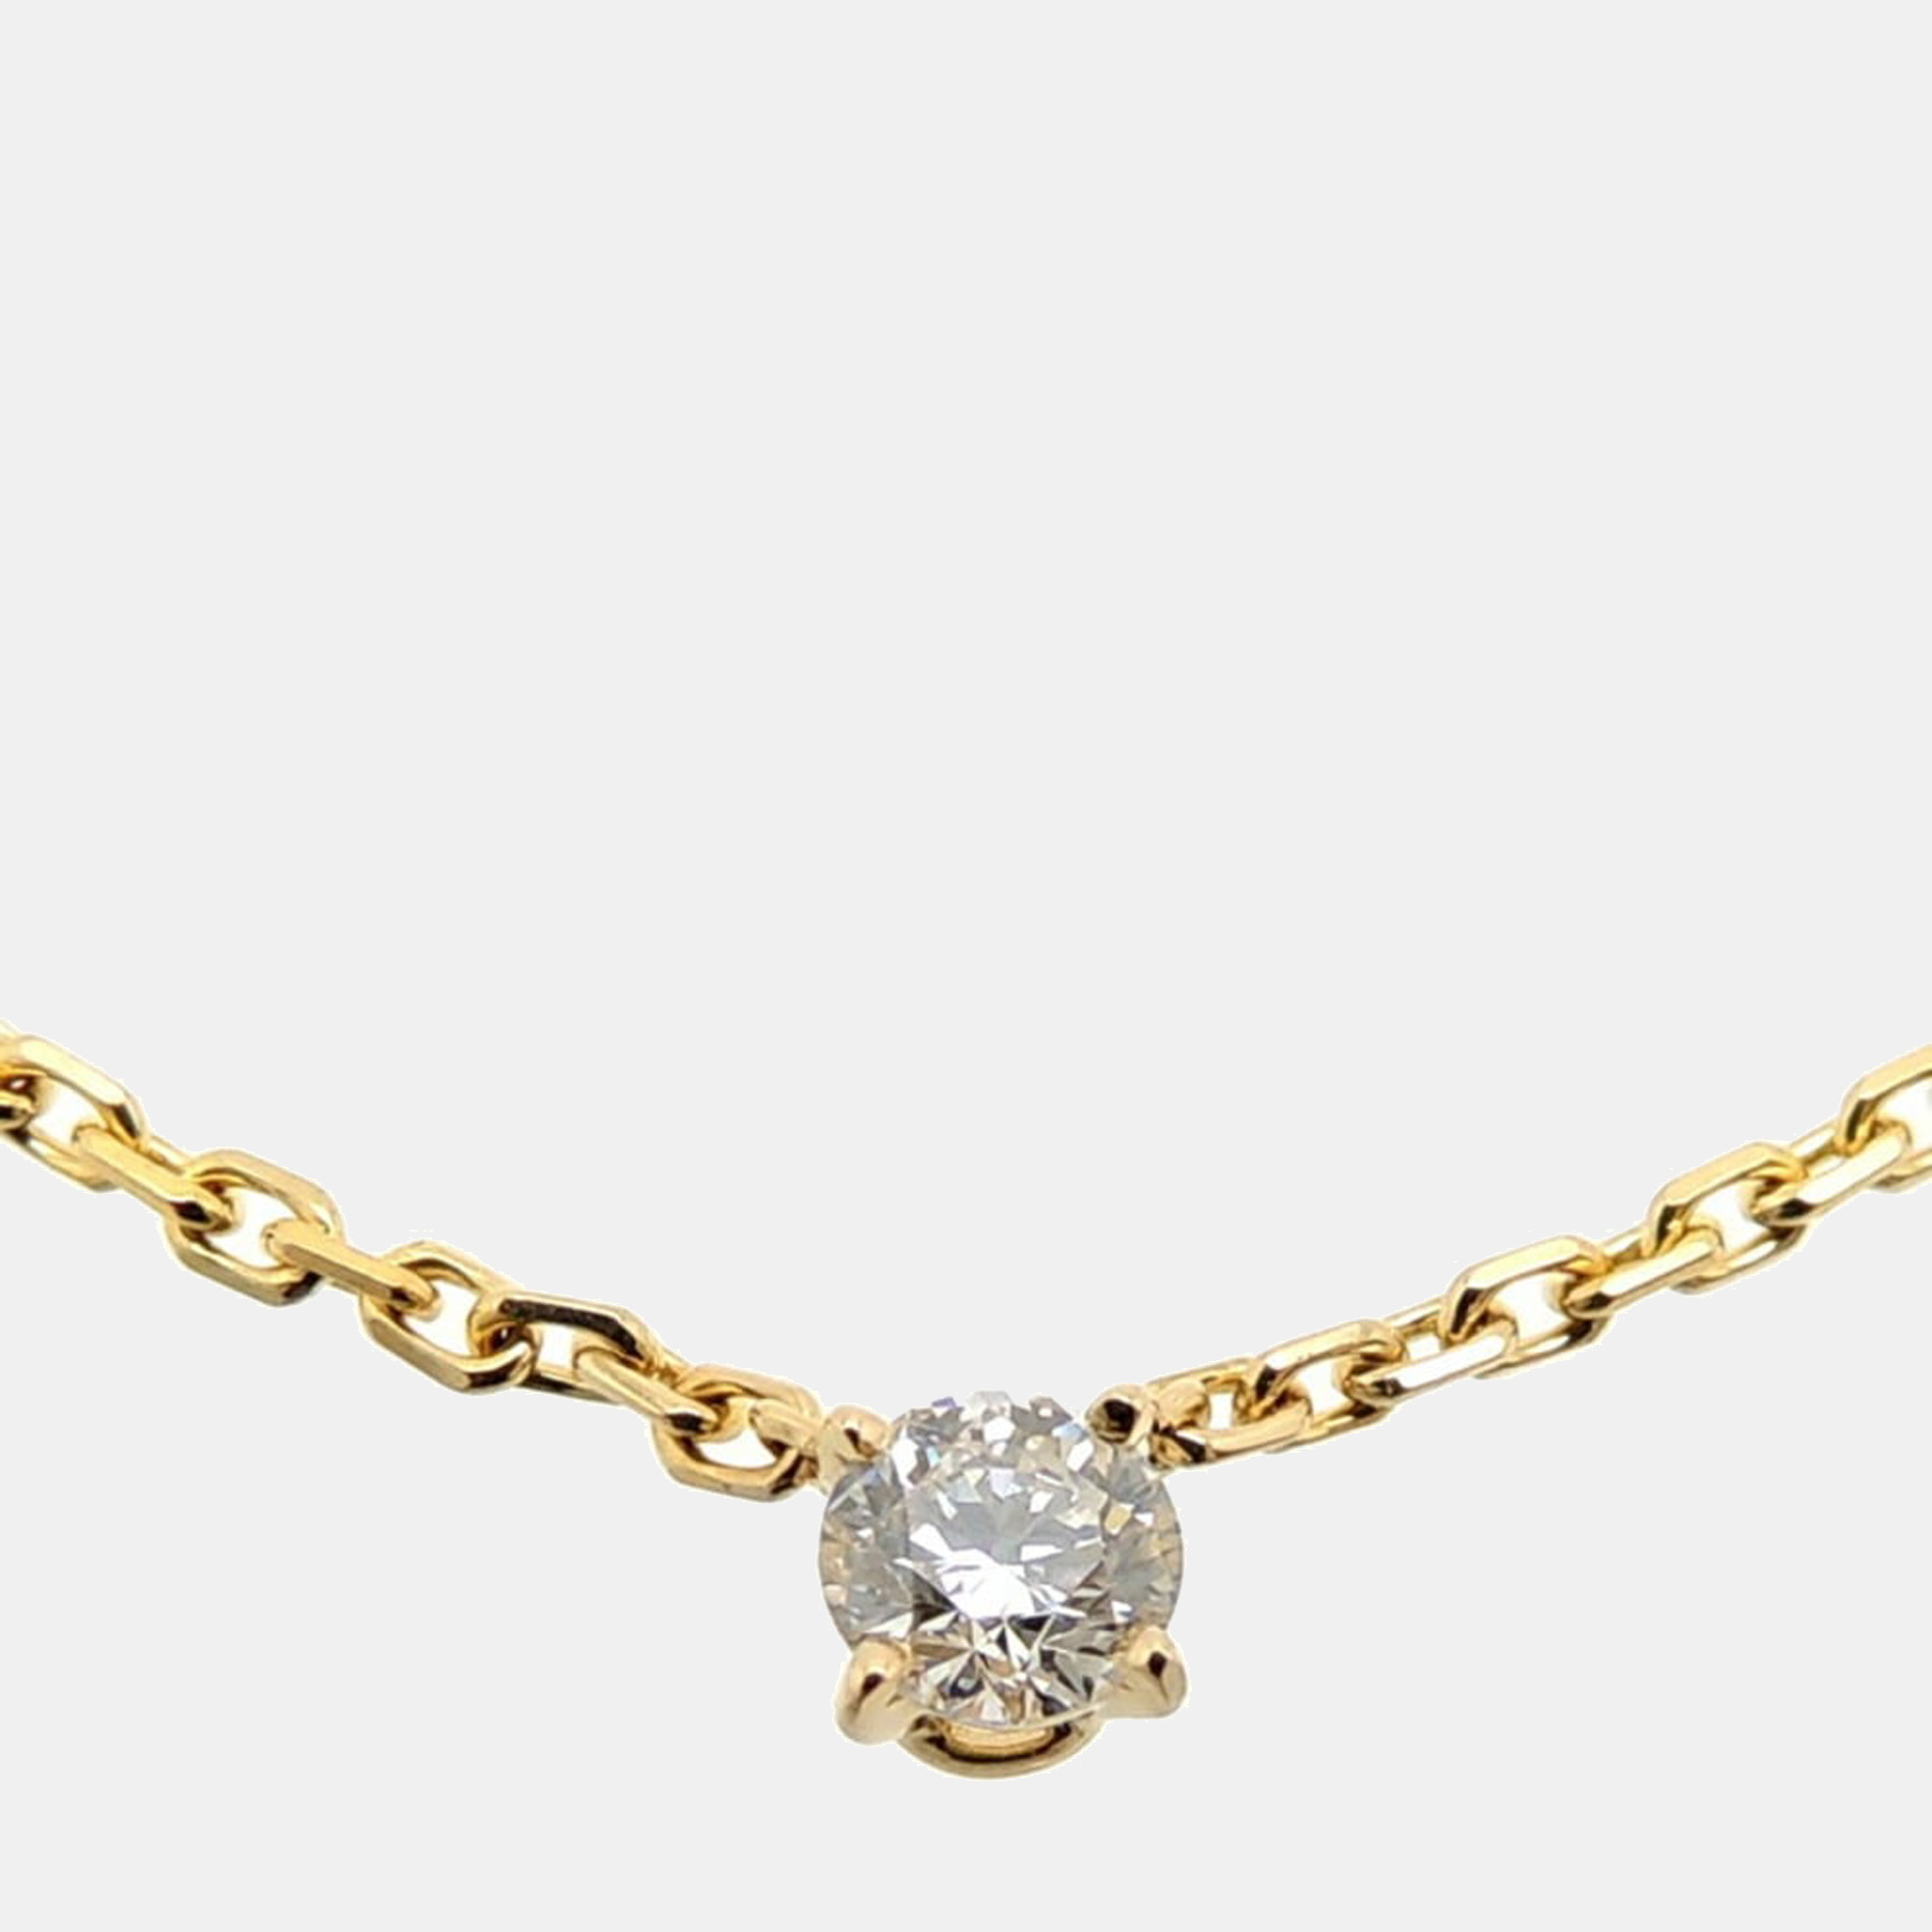 Cartier Love Support 18K Yellow Gold Diamond Necklace